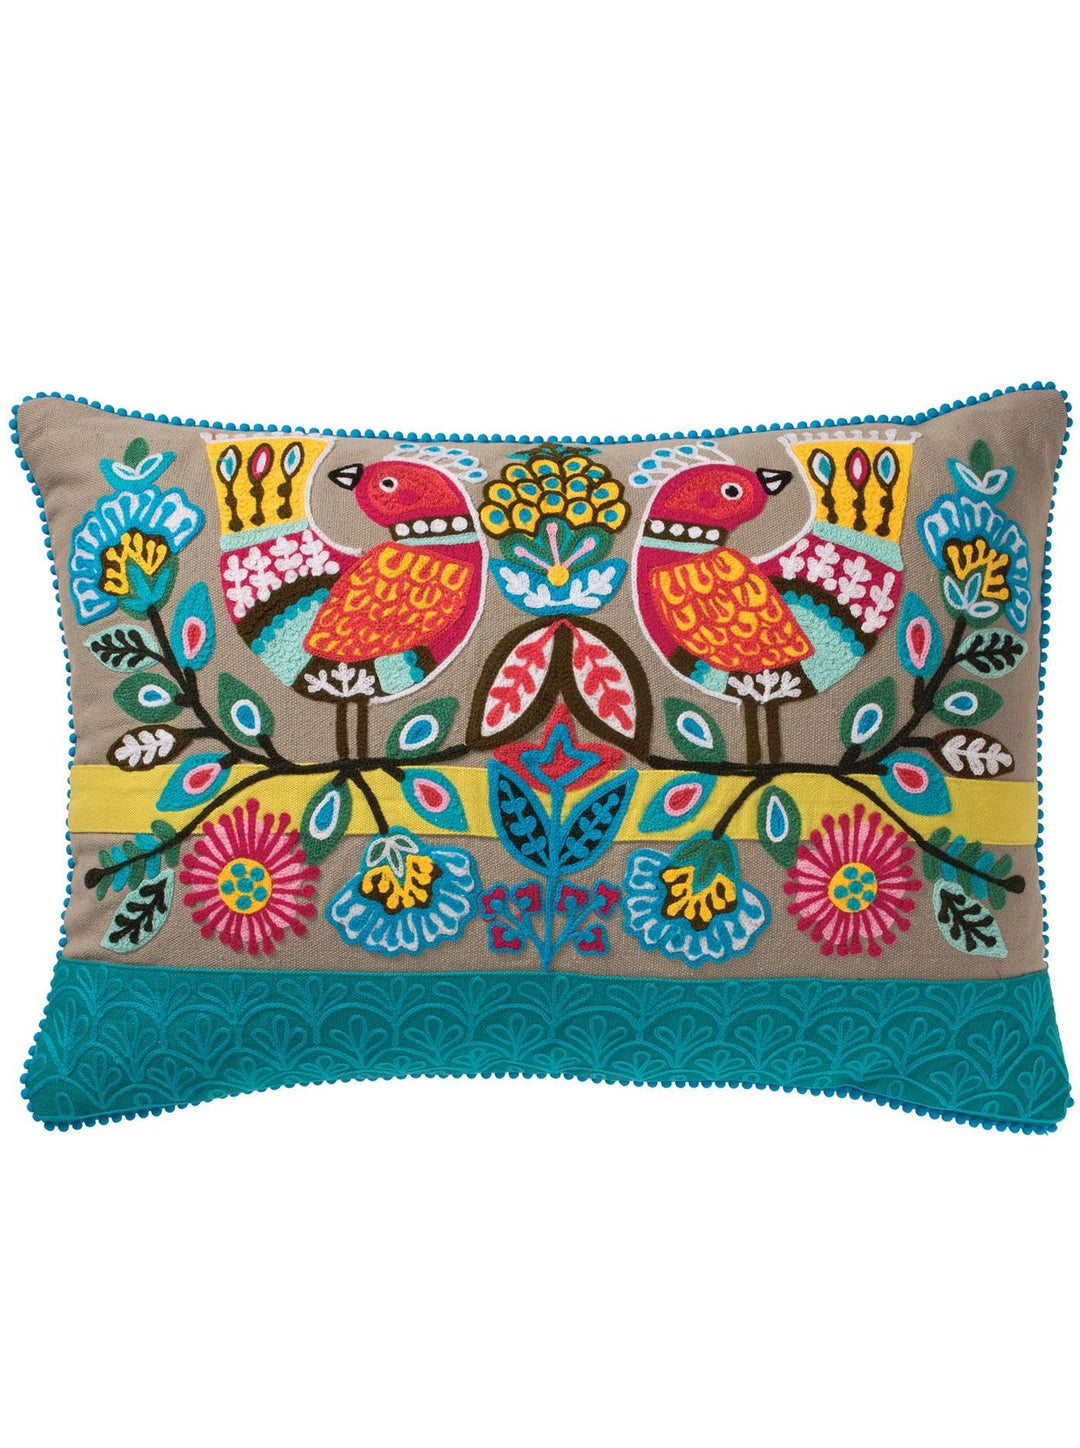 Embroidered Bird Cushion Cover Second Nature Online